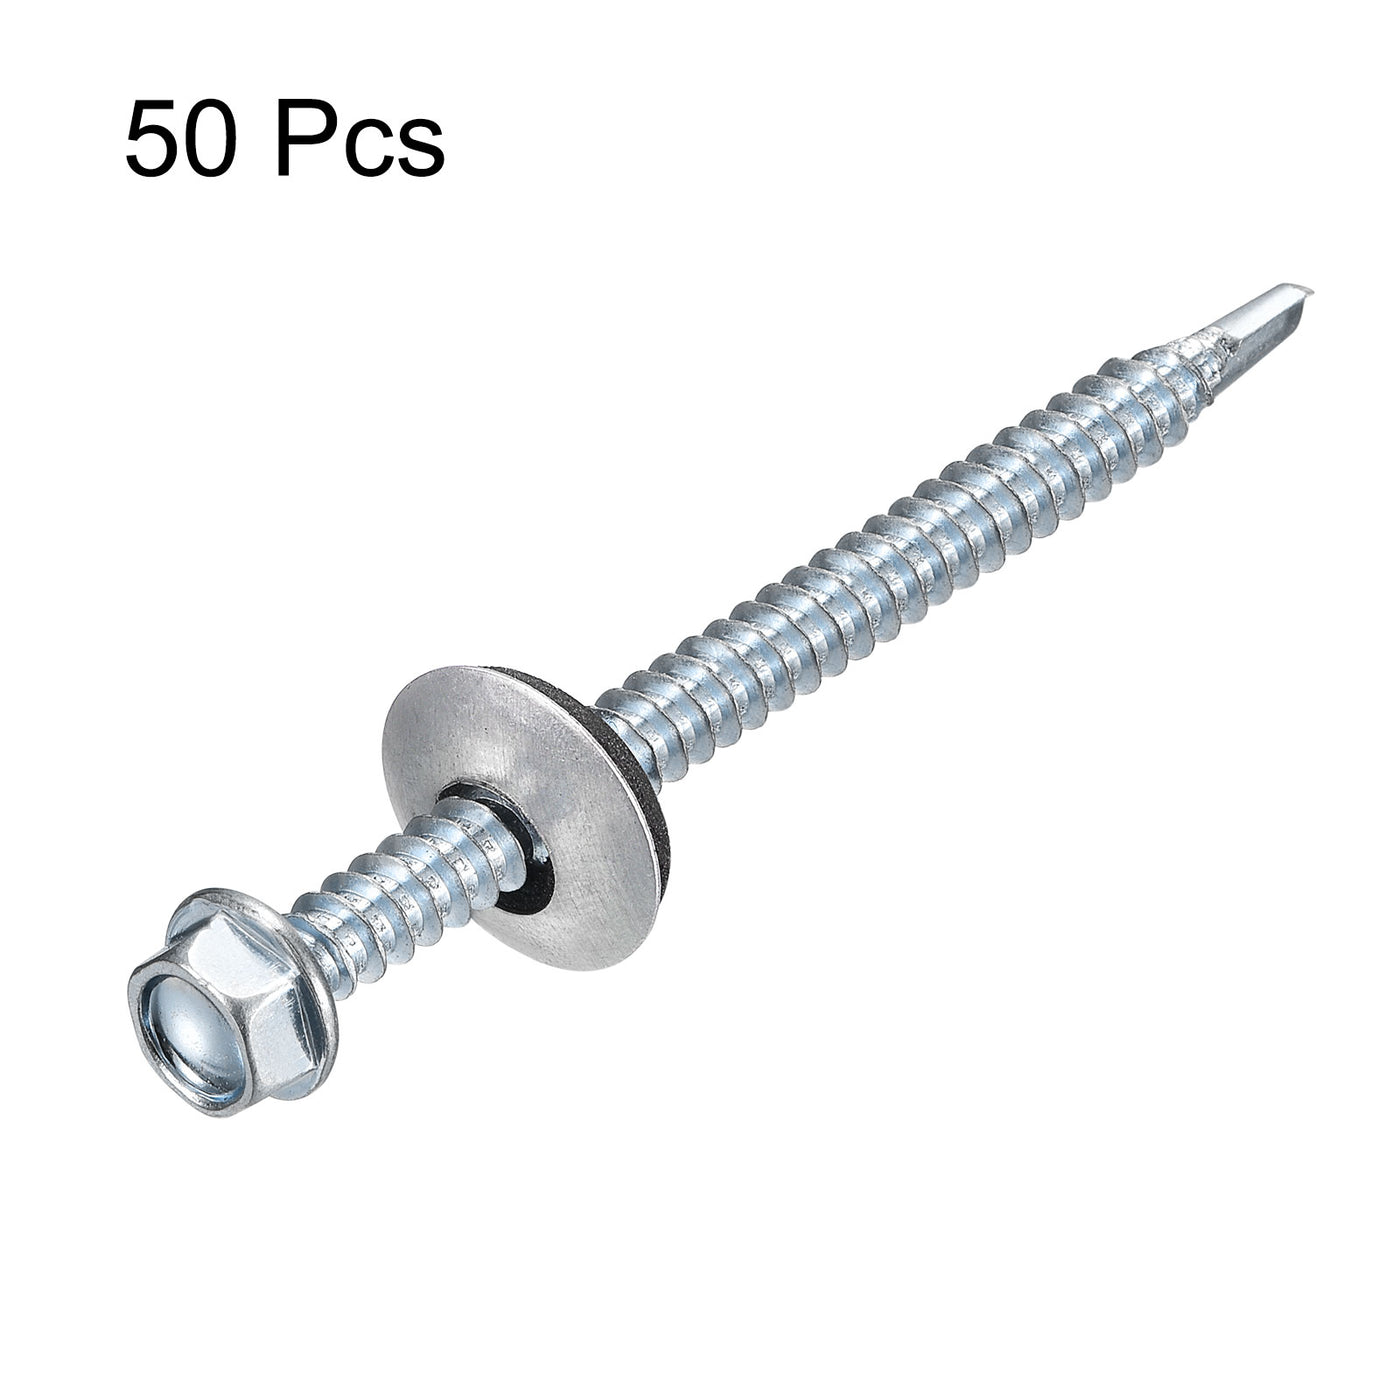 uxcell Uxcell #12 x 2-61/64" Self Drilling Screws, 50pcs Roofing Screws with EPDM Washer